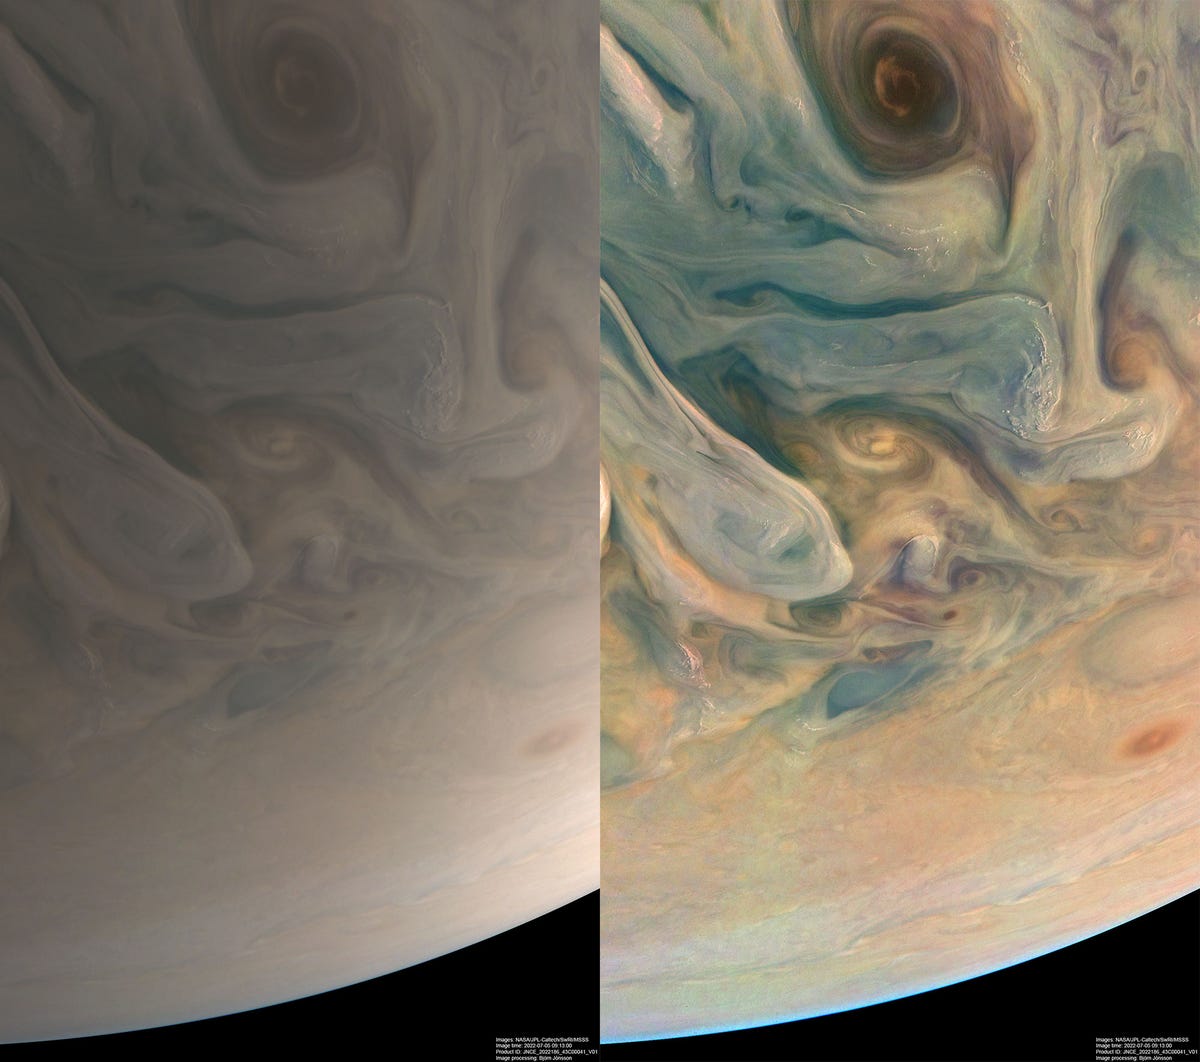 On the left is a wispy, beige version of Jupiter. On the right is the same image, except with blue, orange and yellow-ish hues.